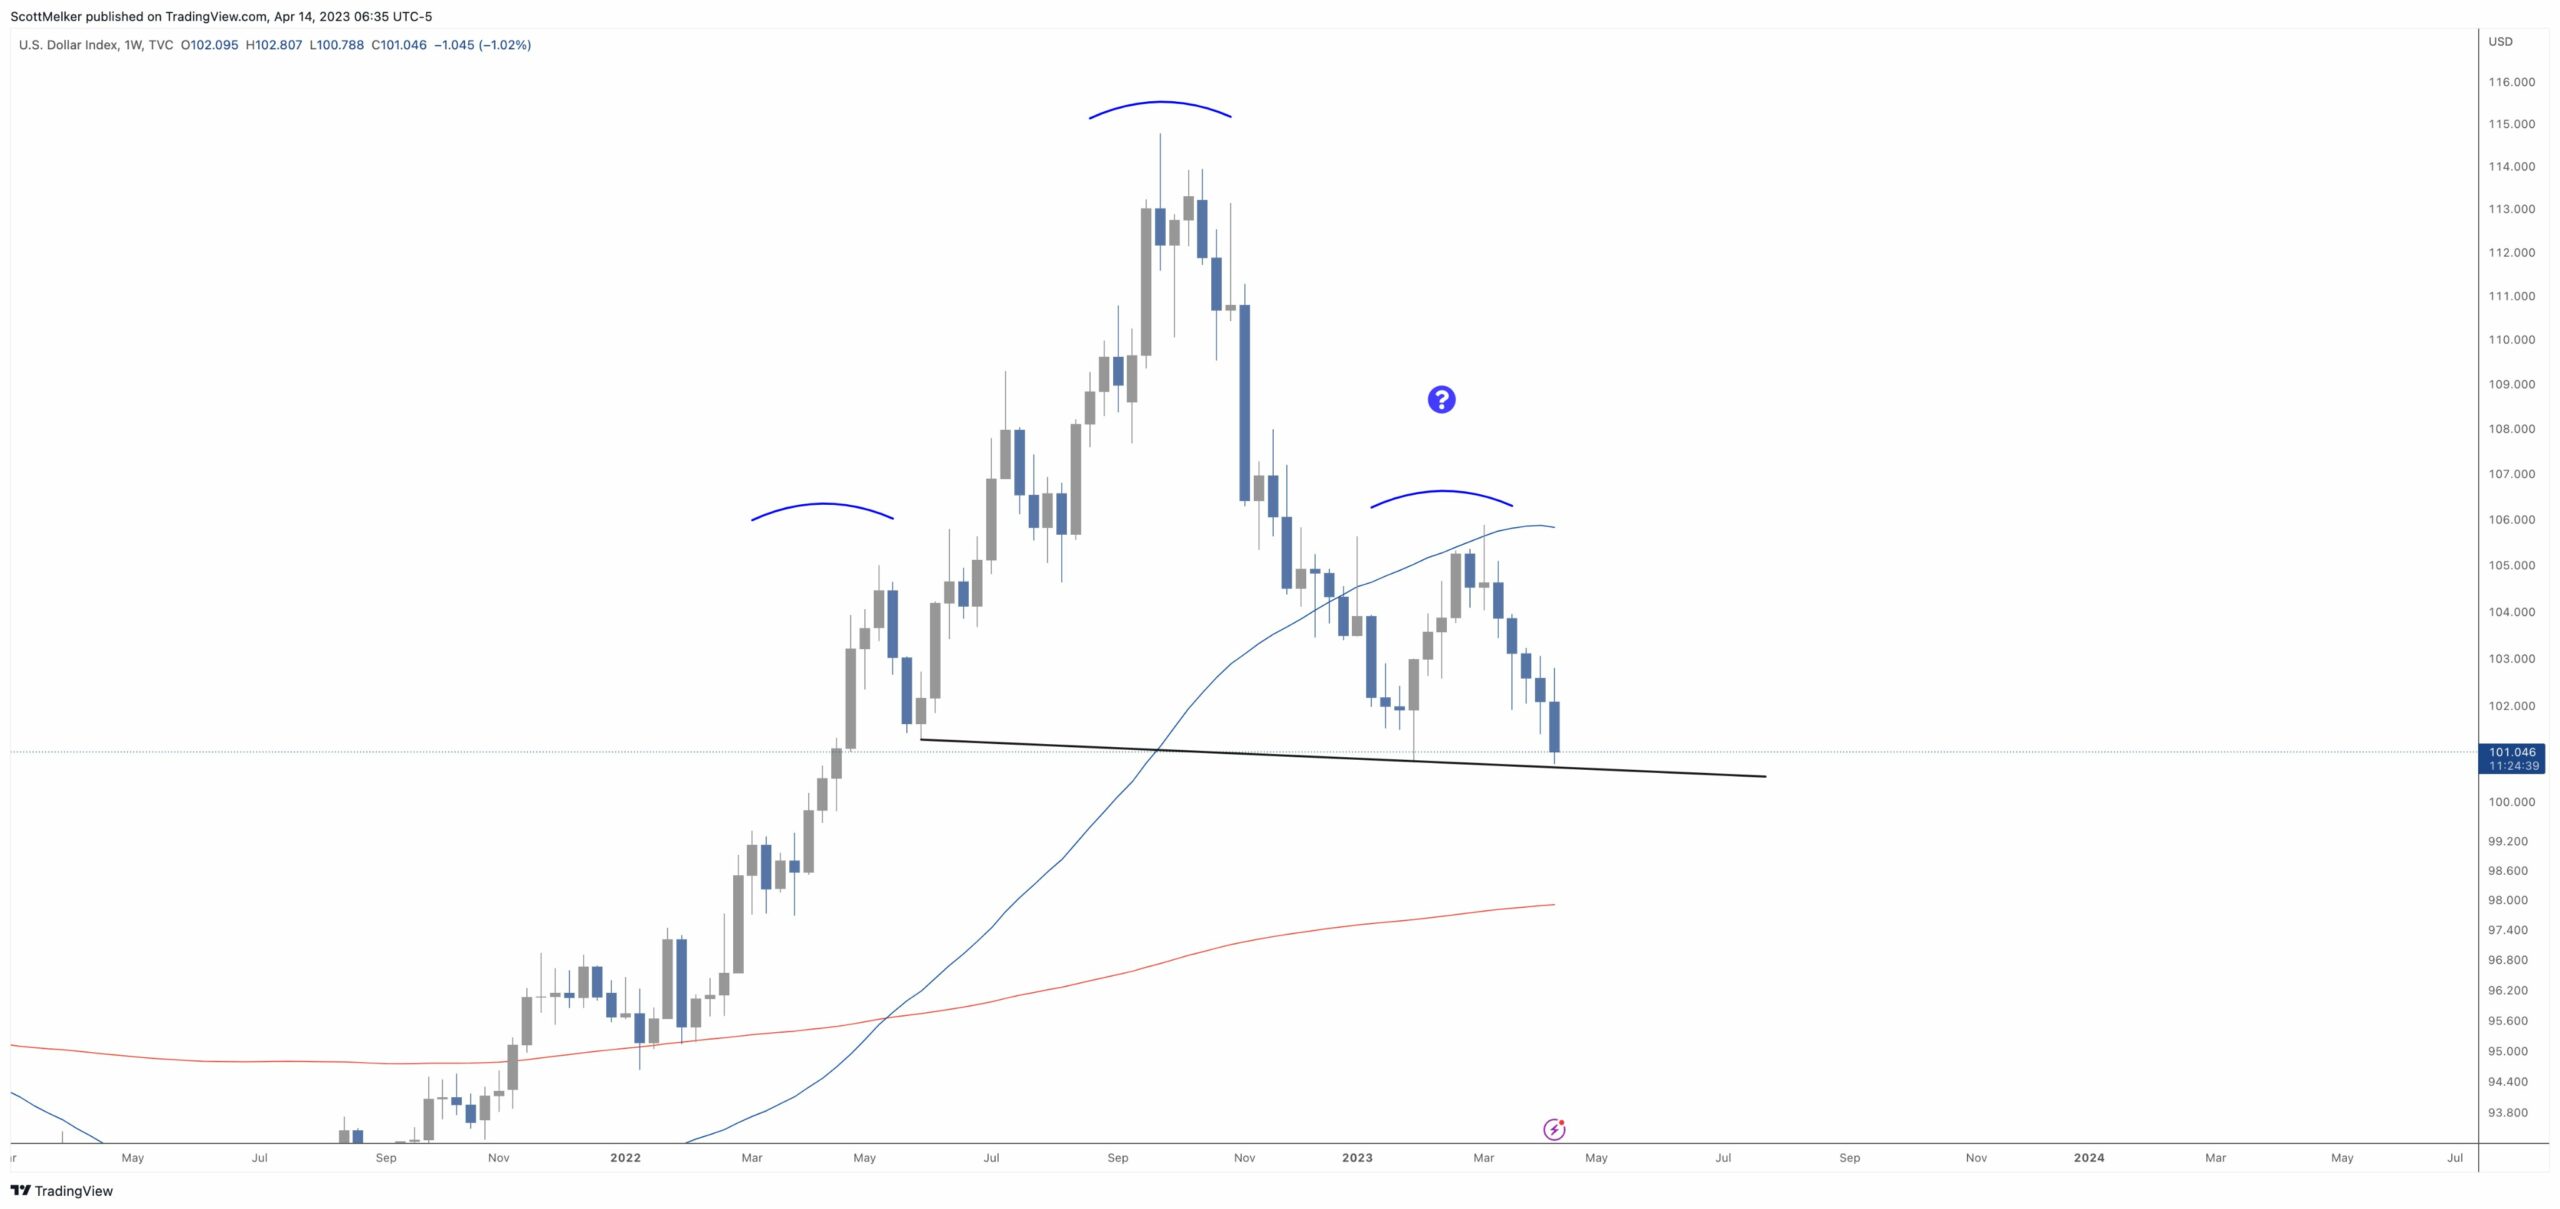 Sustained DXY weakness incoming? Bitcoin